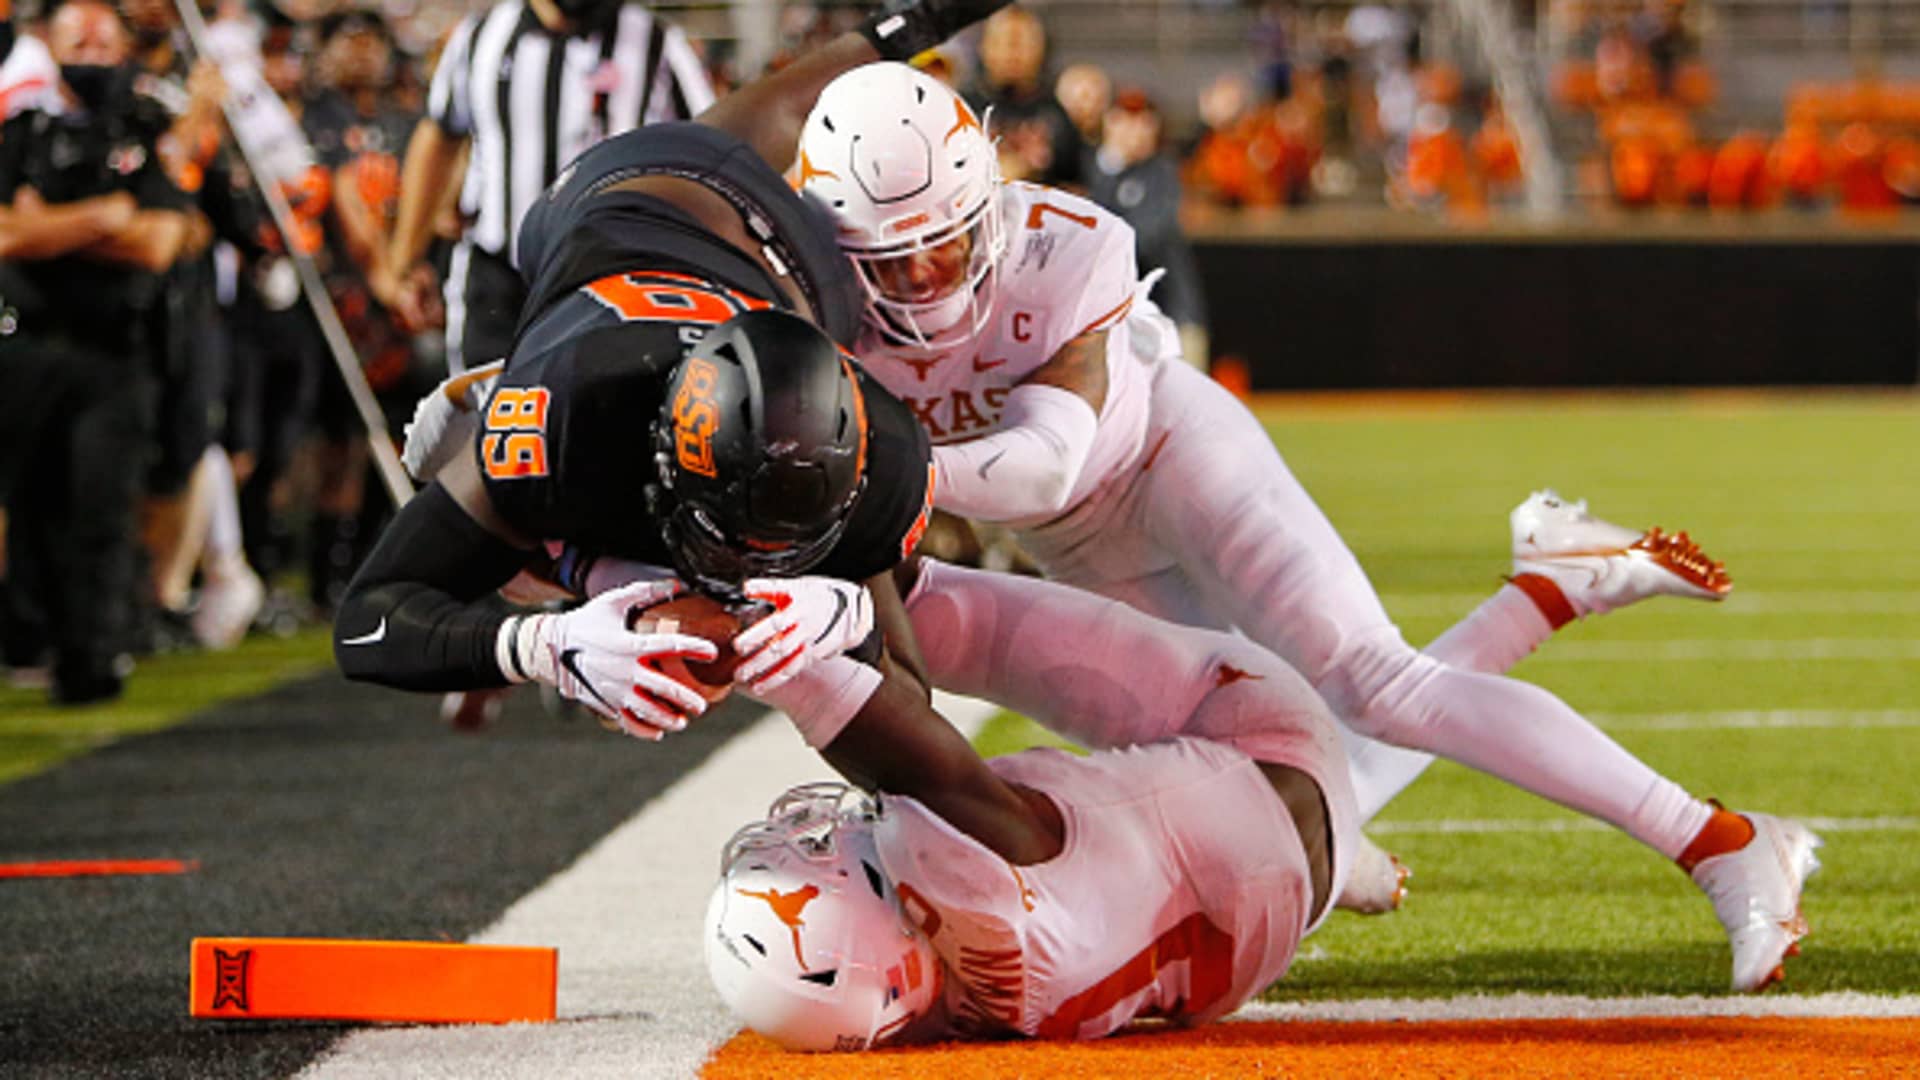 Tight end Jelani Woods #89 of the Oklahoma State Cowboys dives into the end zone for a nullified overtime touchdown against defensive back Caden Sterns #7 and linebacker DeMarvion Overshown #0 of the Texas Longhorns at Boone Pickens Stadium on October 31, 2020 in Stillwater, Oklahoma.